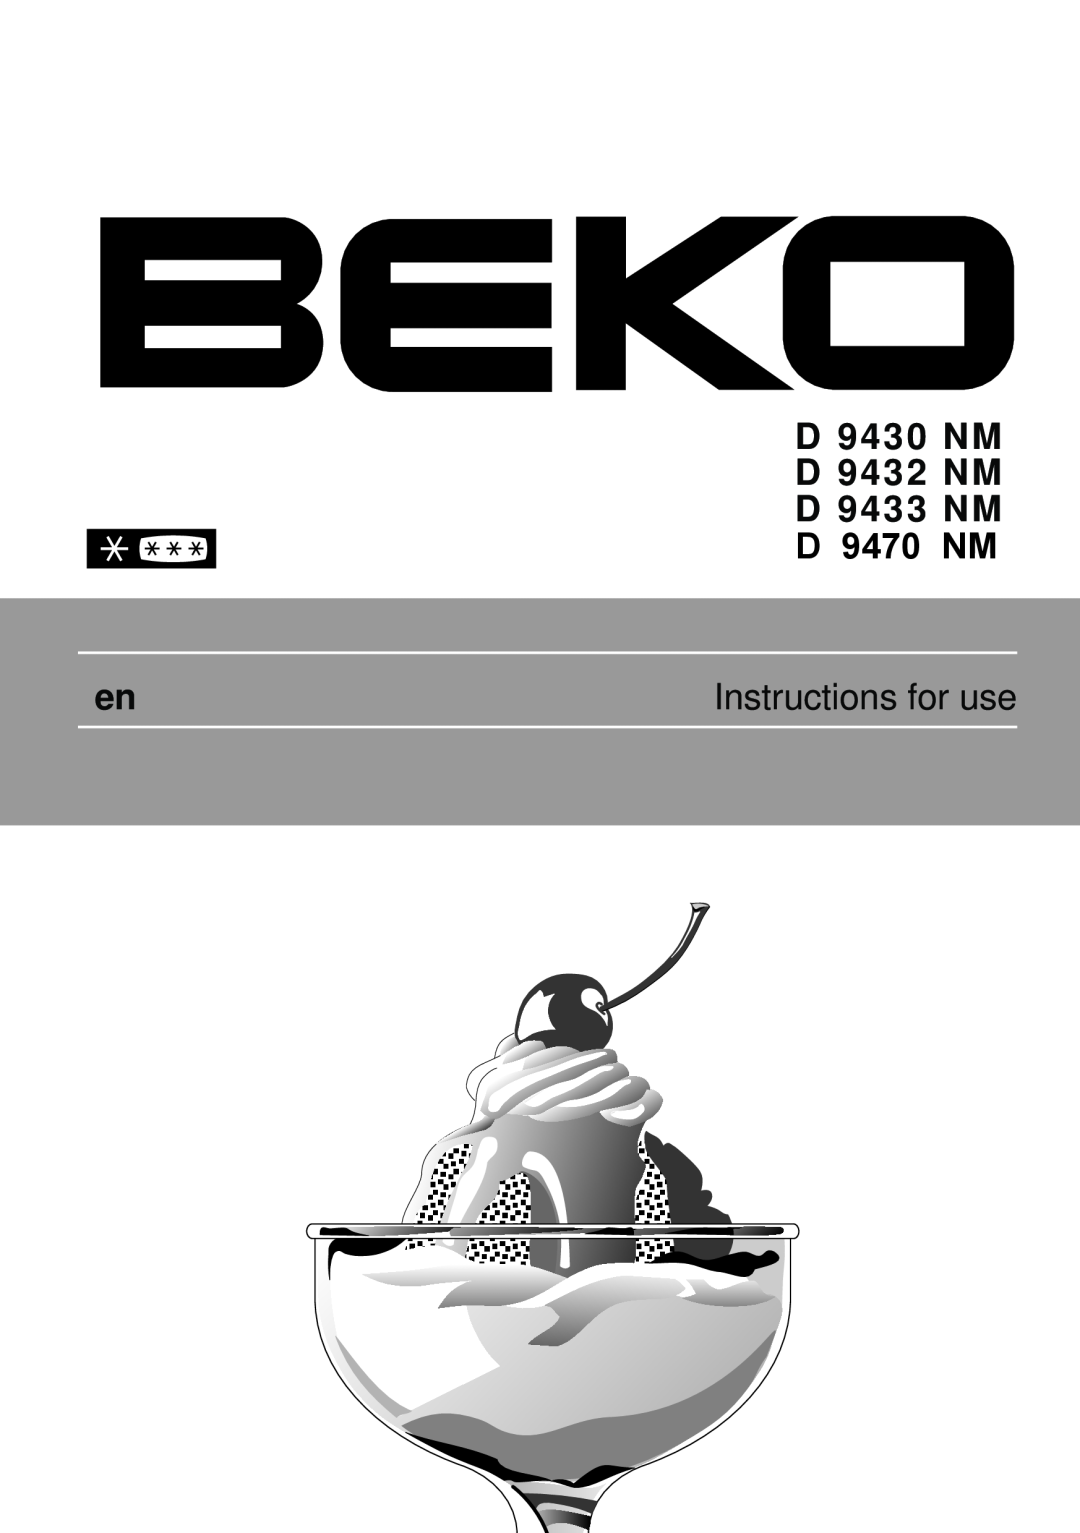 Beko manual D 9430 NM D 9432 NM D 9433 NM, Instructions for use 